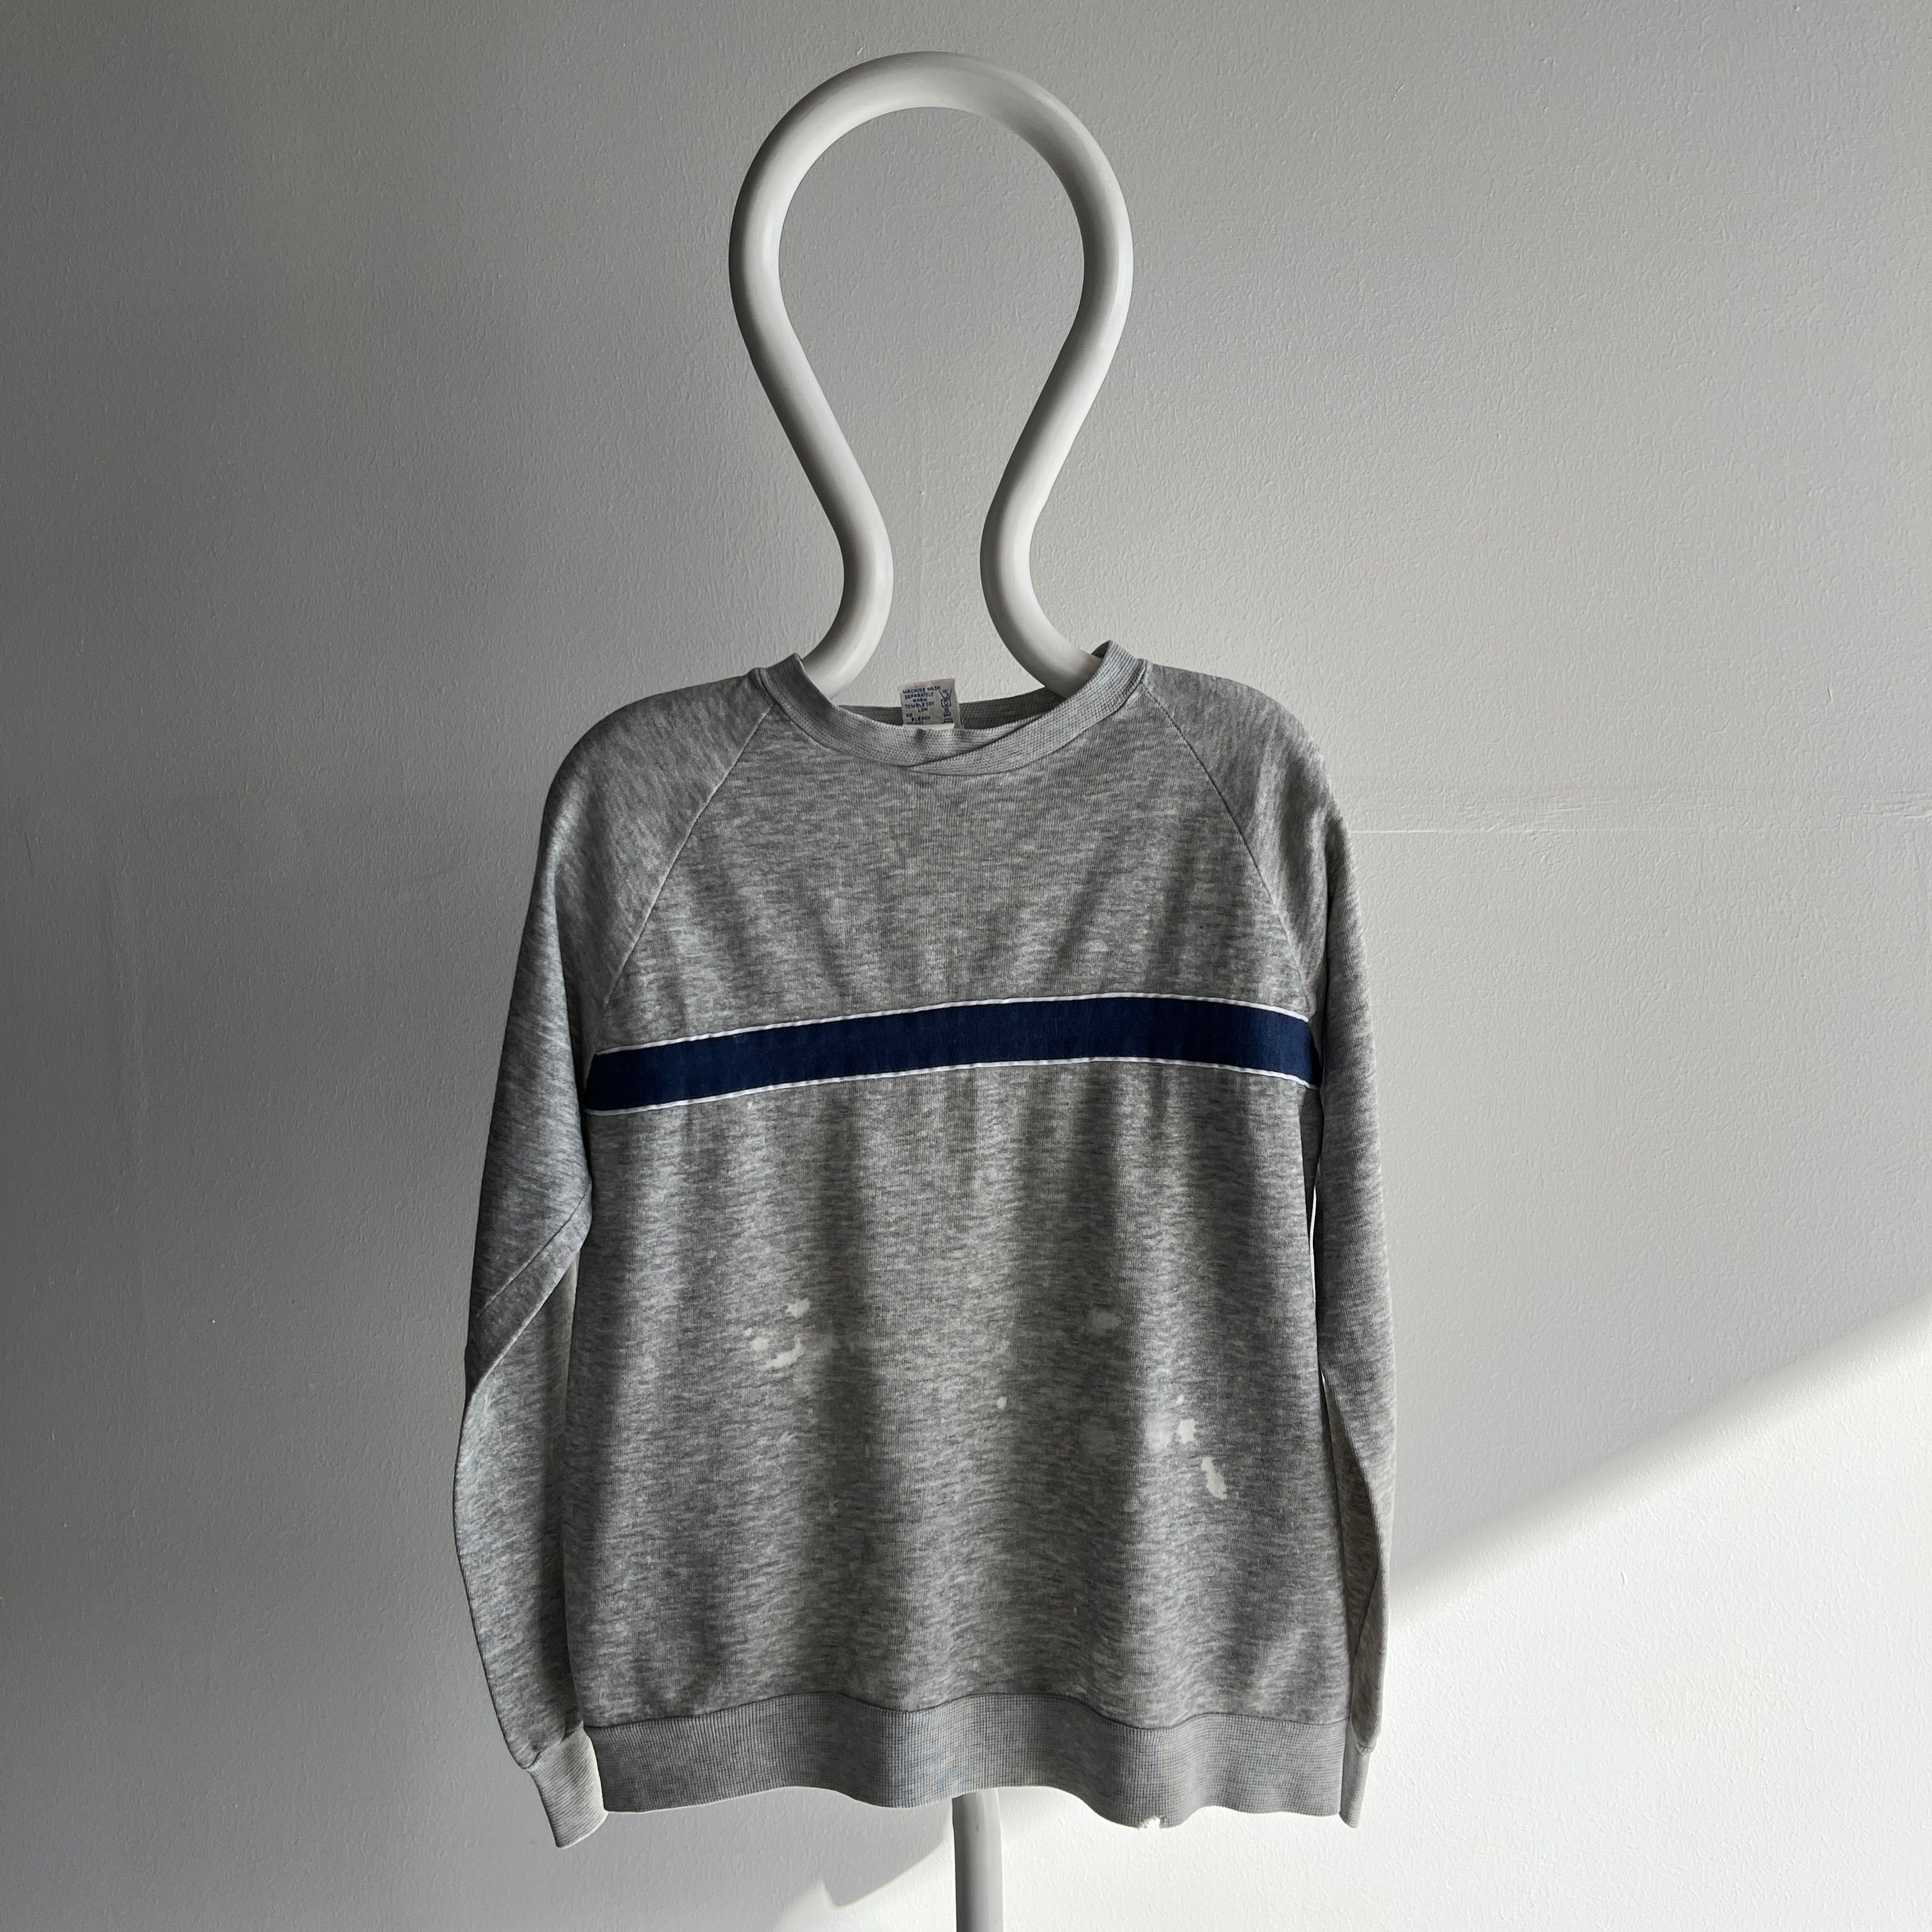 1980s Blank Striped Sweatshirt with Faint Staining